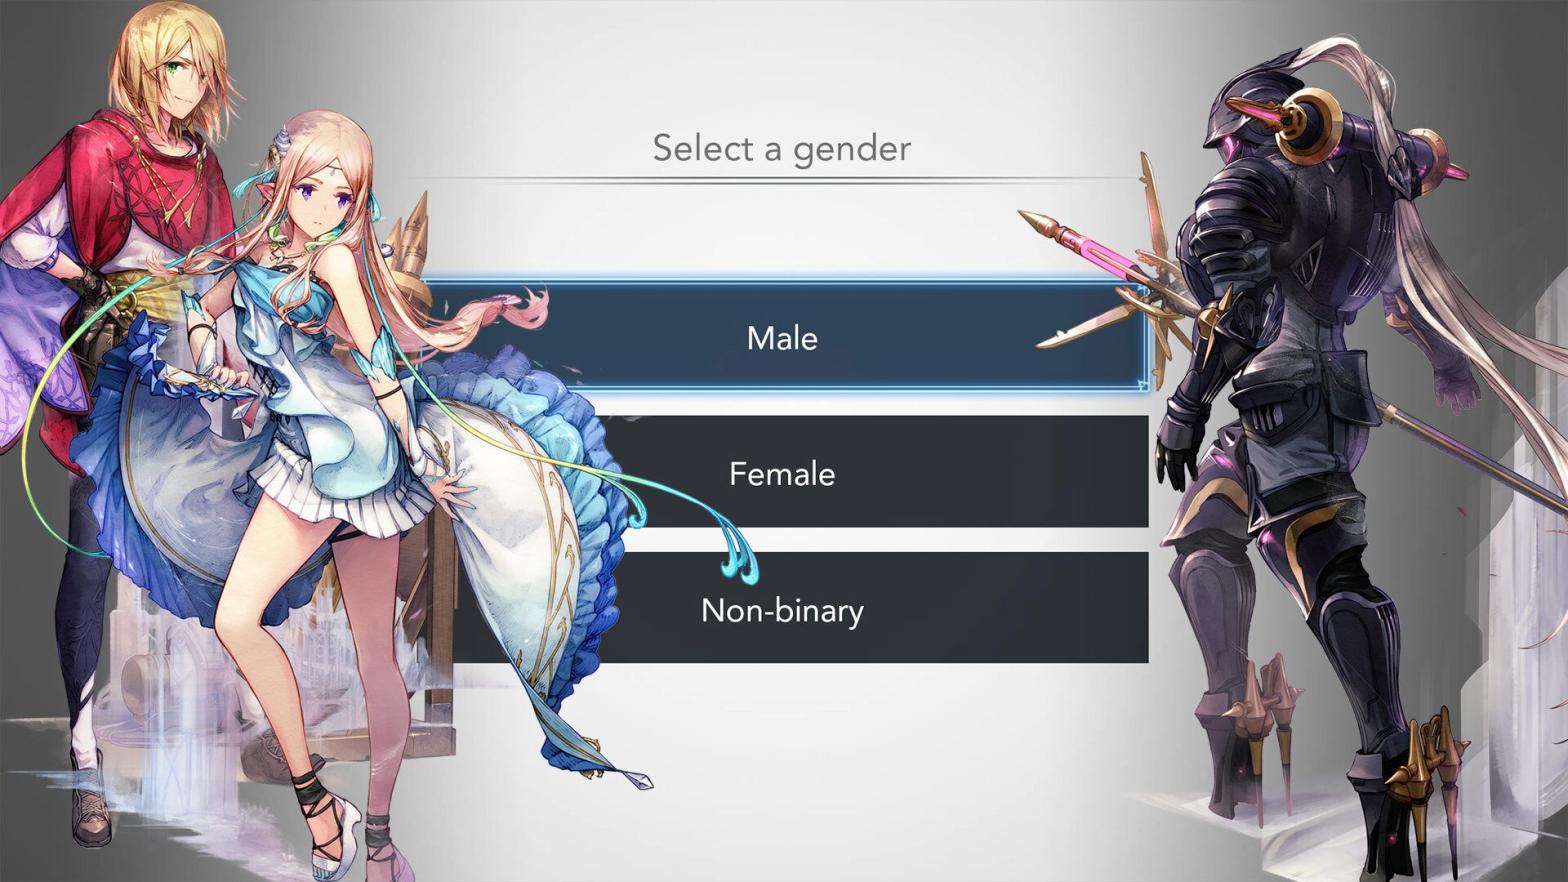 Male, female, and cool hat. All the genders are accounted for.  (Screenshot: Square Enix / Kotaku)